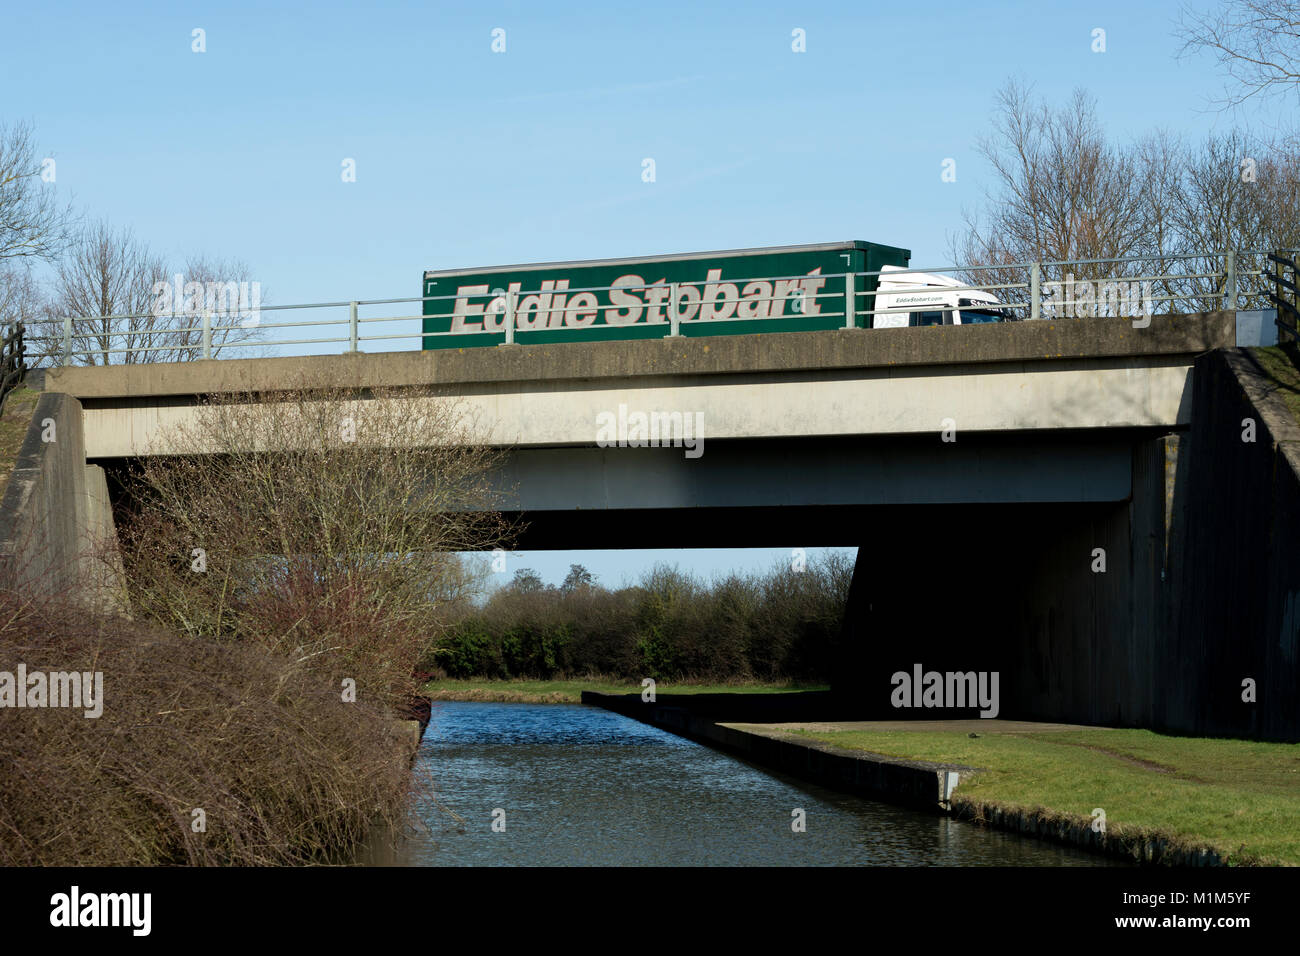 Eddie Stobart lorry on the M40 motorway crossing the Oxford Canal, Banbury, Oxfordshire, UK Stock Photo